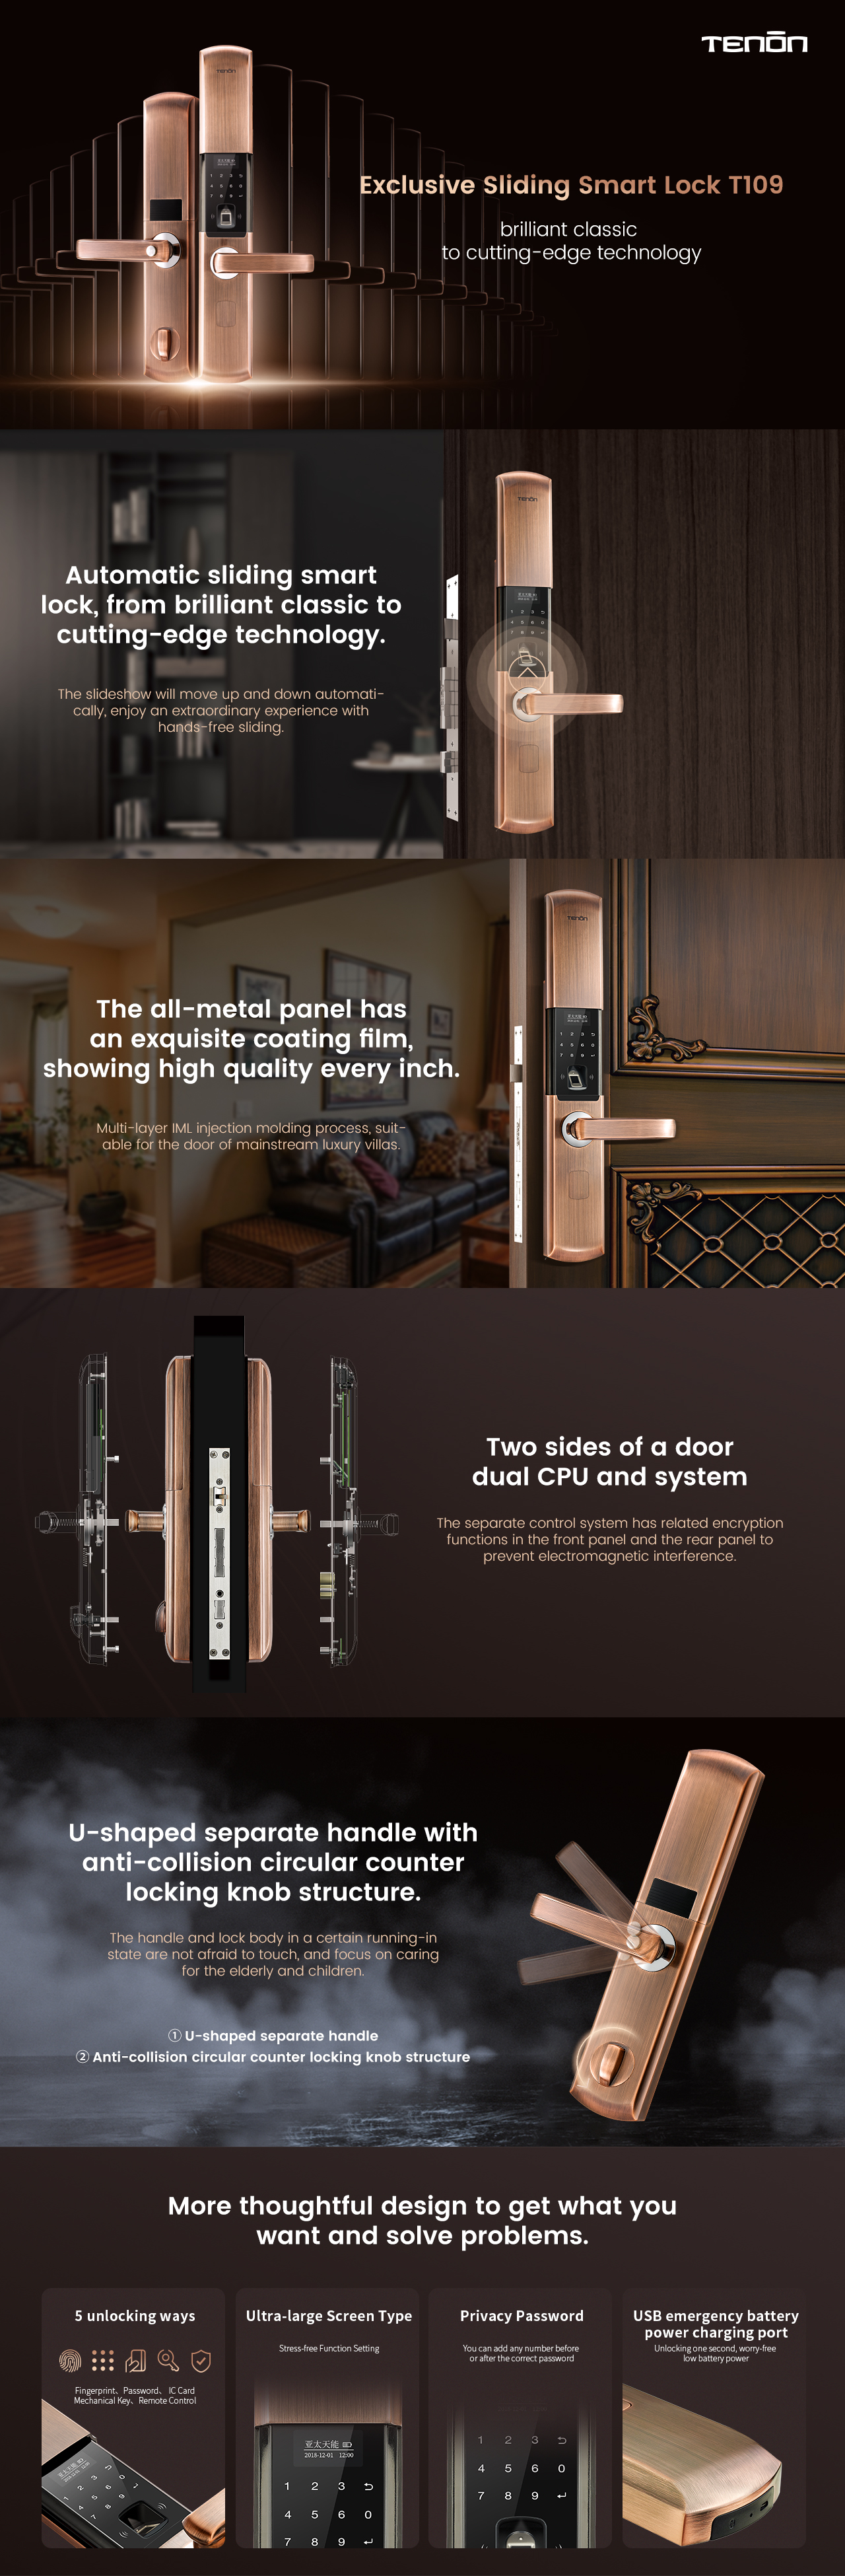 Details of Physical And Digital Access Oled Screen Automatic Sliding Smart Lock